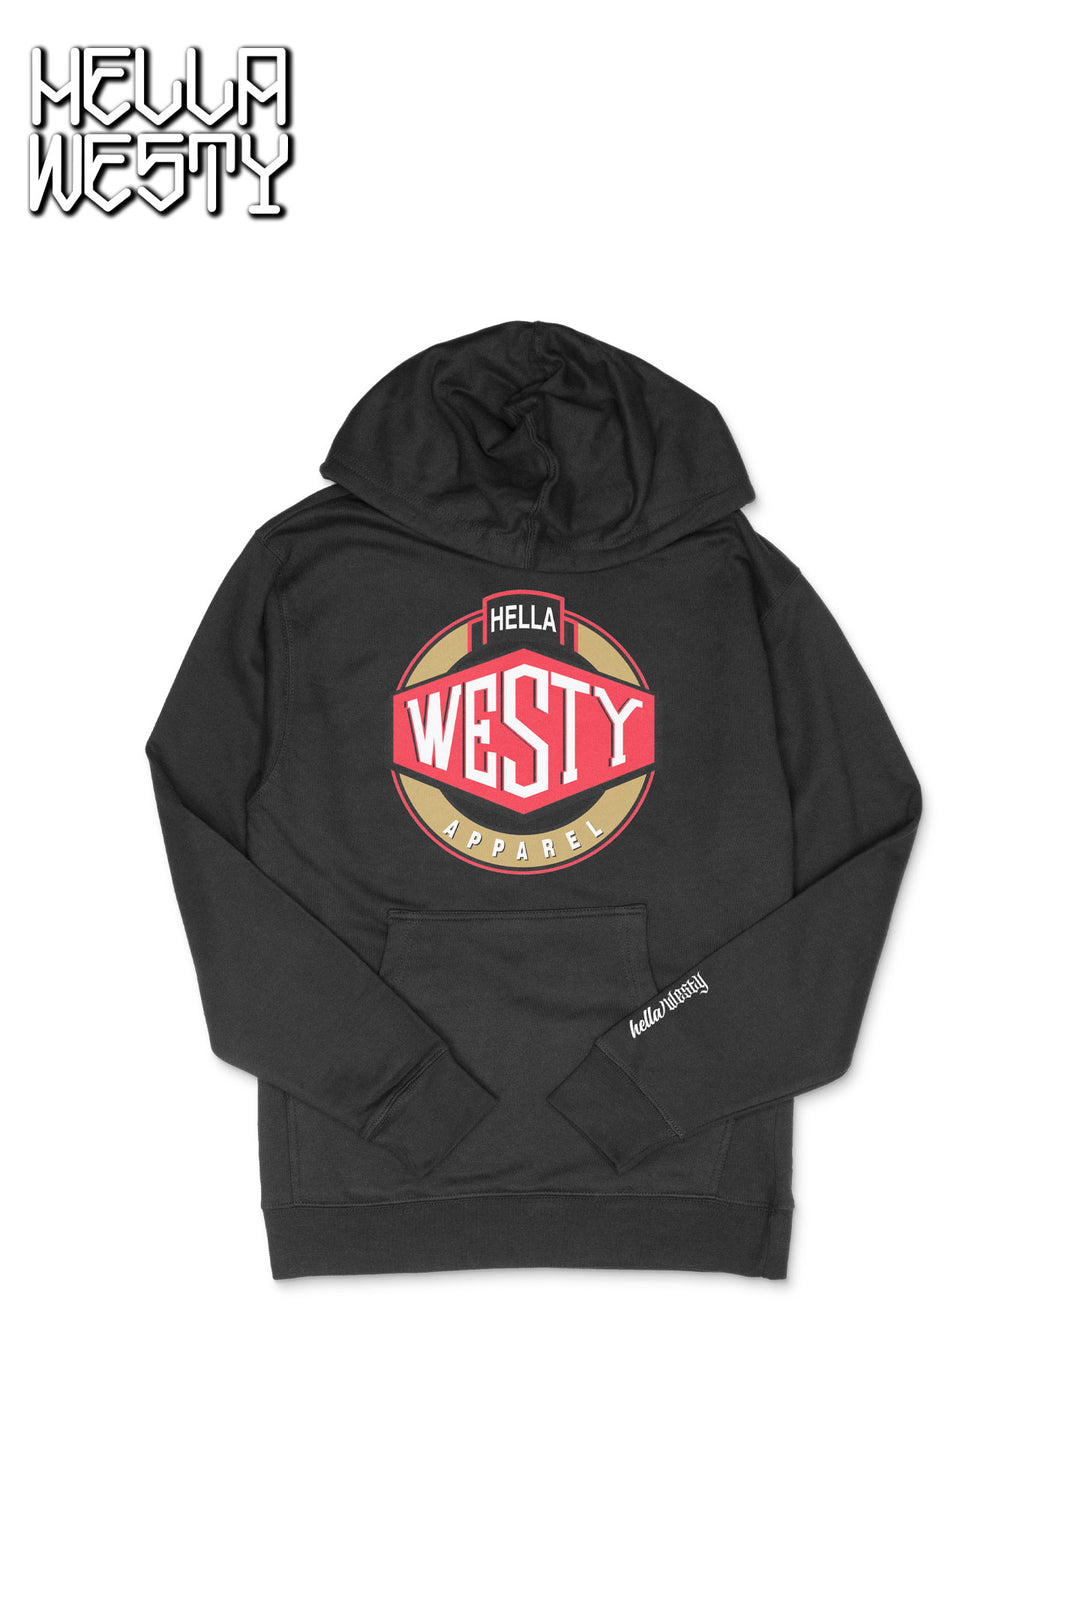 Westy Conference Hoodie